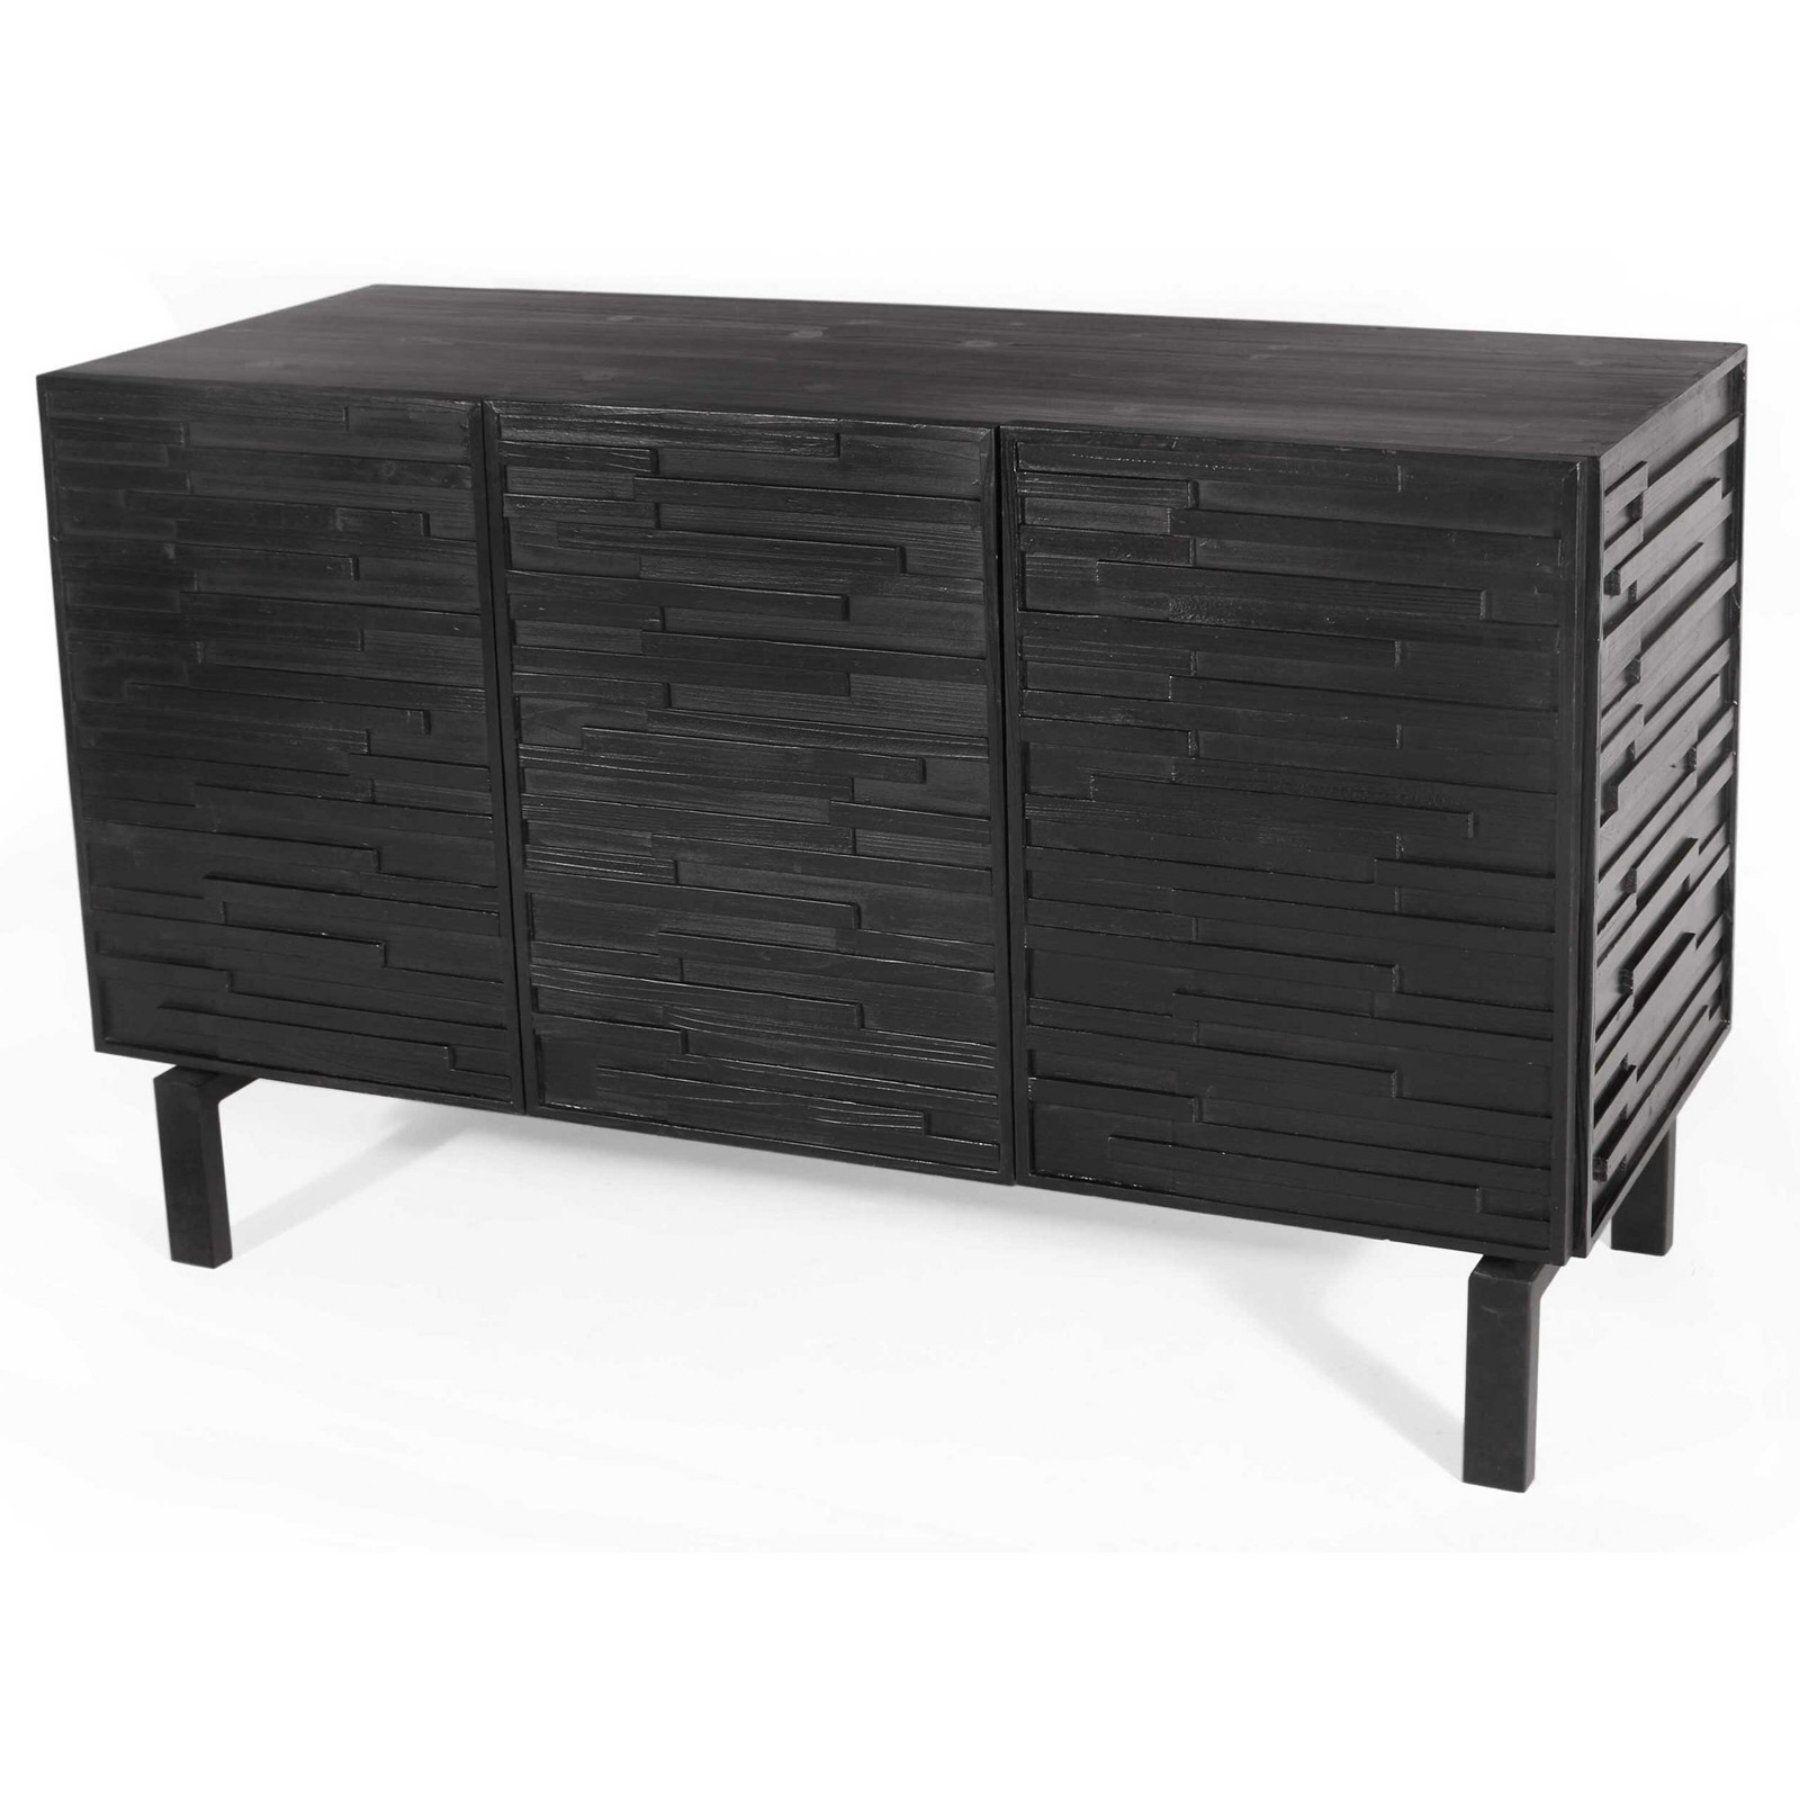 Gild Design House Nikos Sideboard In 2019 | Products Regarding Casolino Sideboards (View 18 of 20)